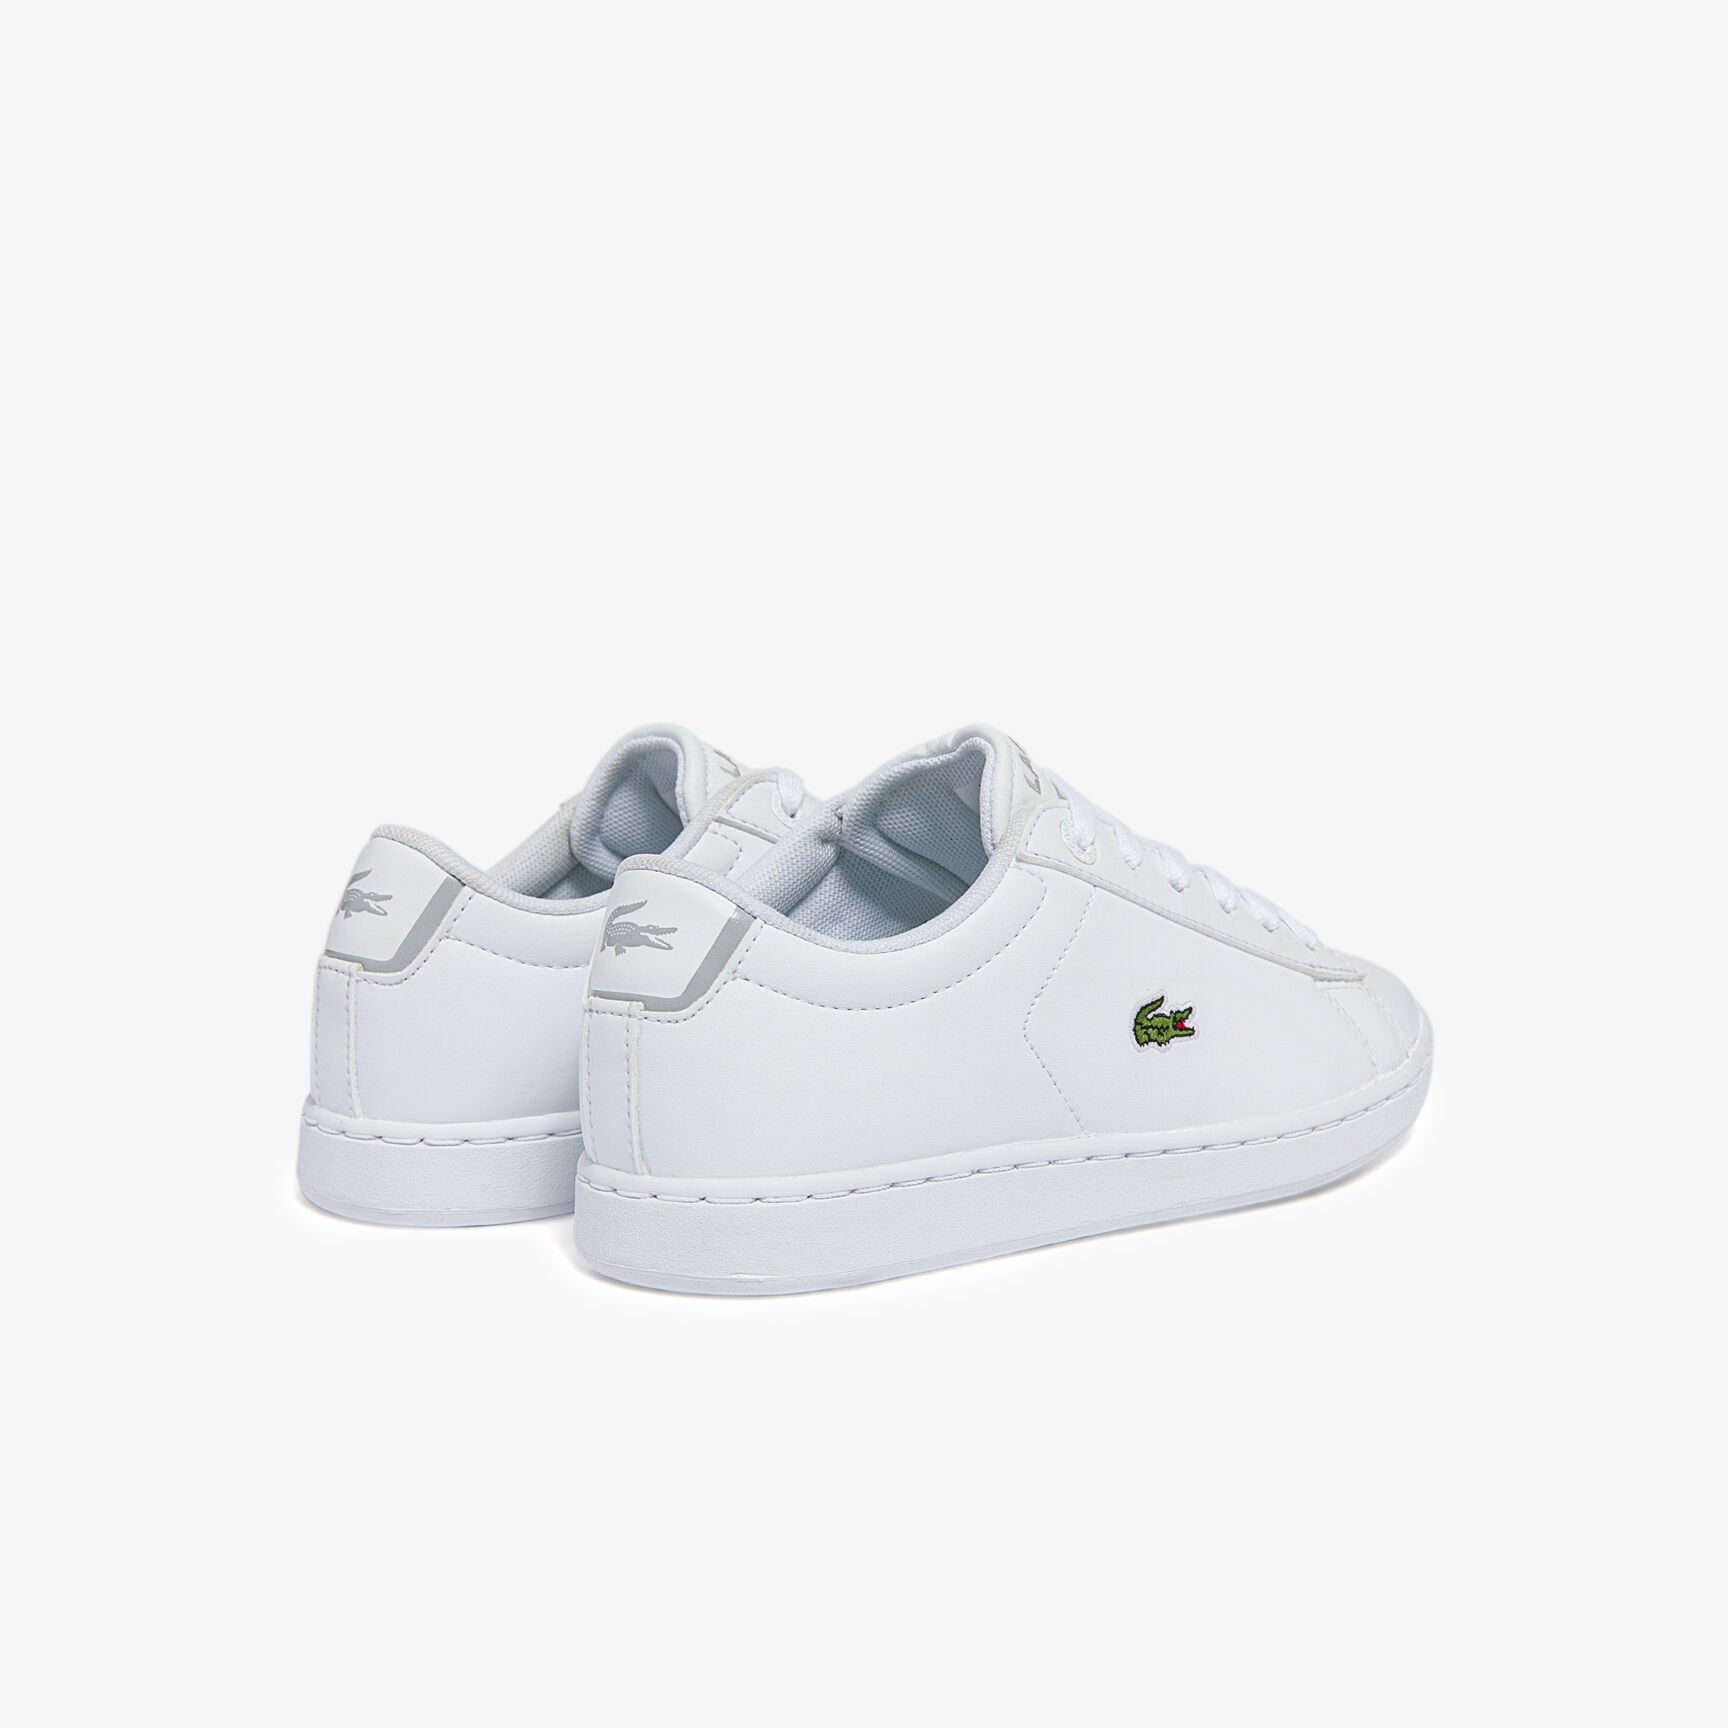 Buy Children's Carnaby Evo BL Synthetic Trainers | Lacoste UAE